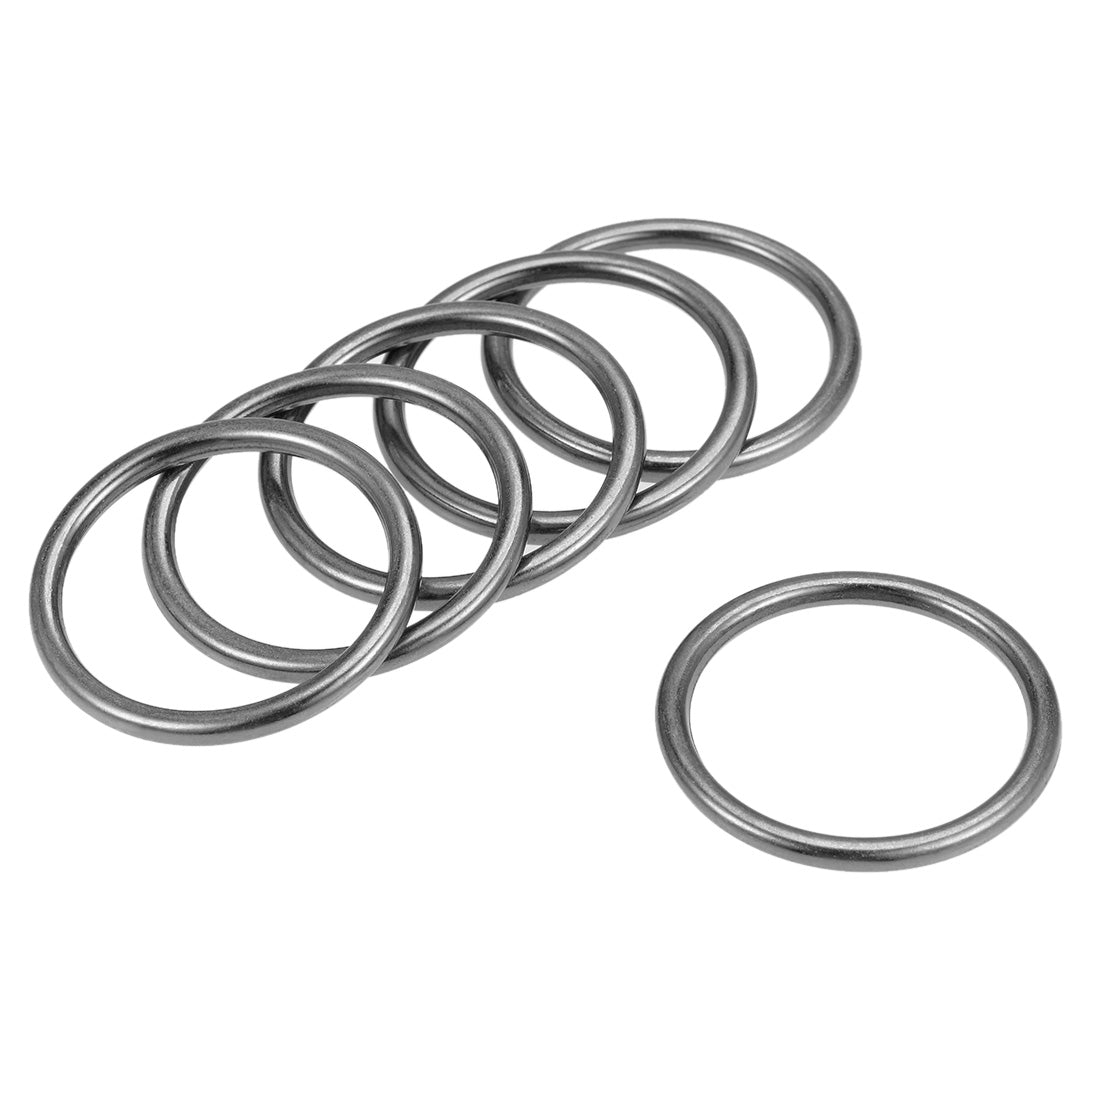 uxcell Uxcell O Ring Buckle 30mm(1.2") ID 3mm Thickness Zinc Alloy O-Rings for Hardware Bags Belts Craft DIY Accessories, Black 6pcs